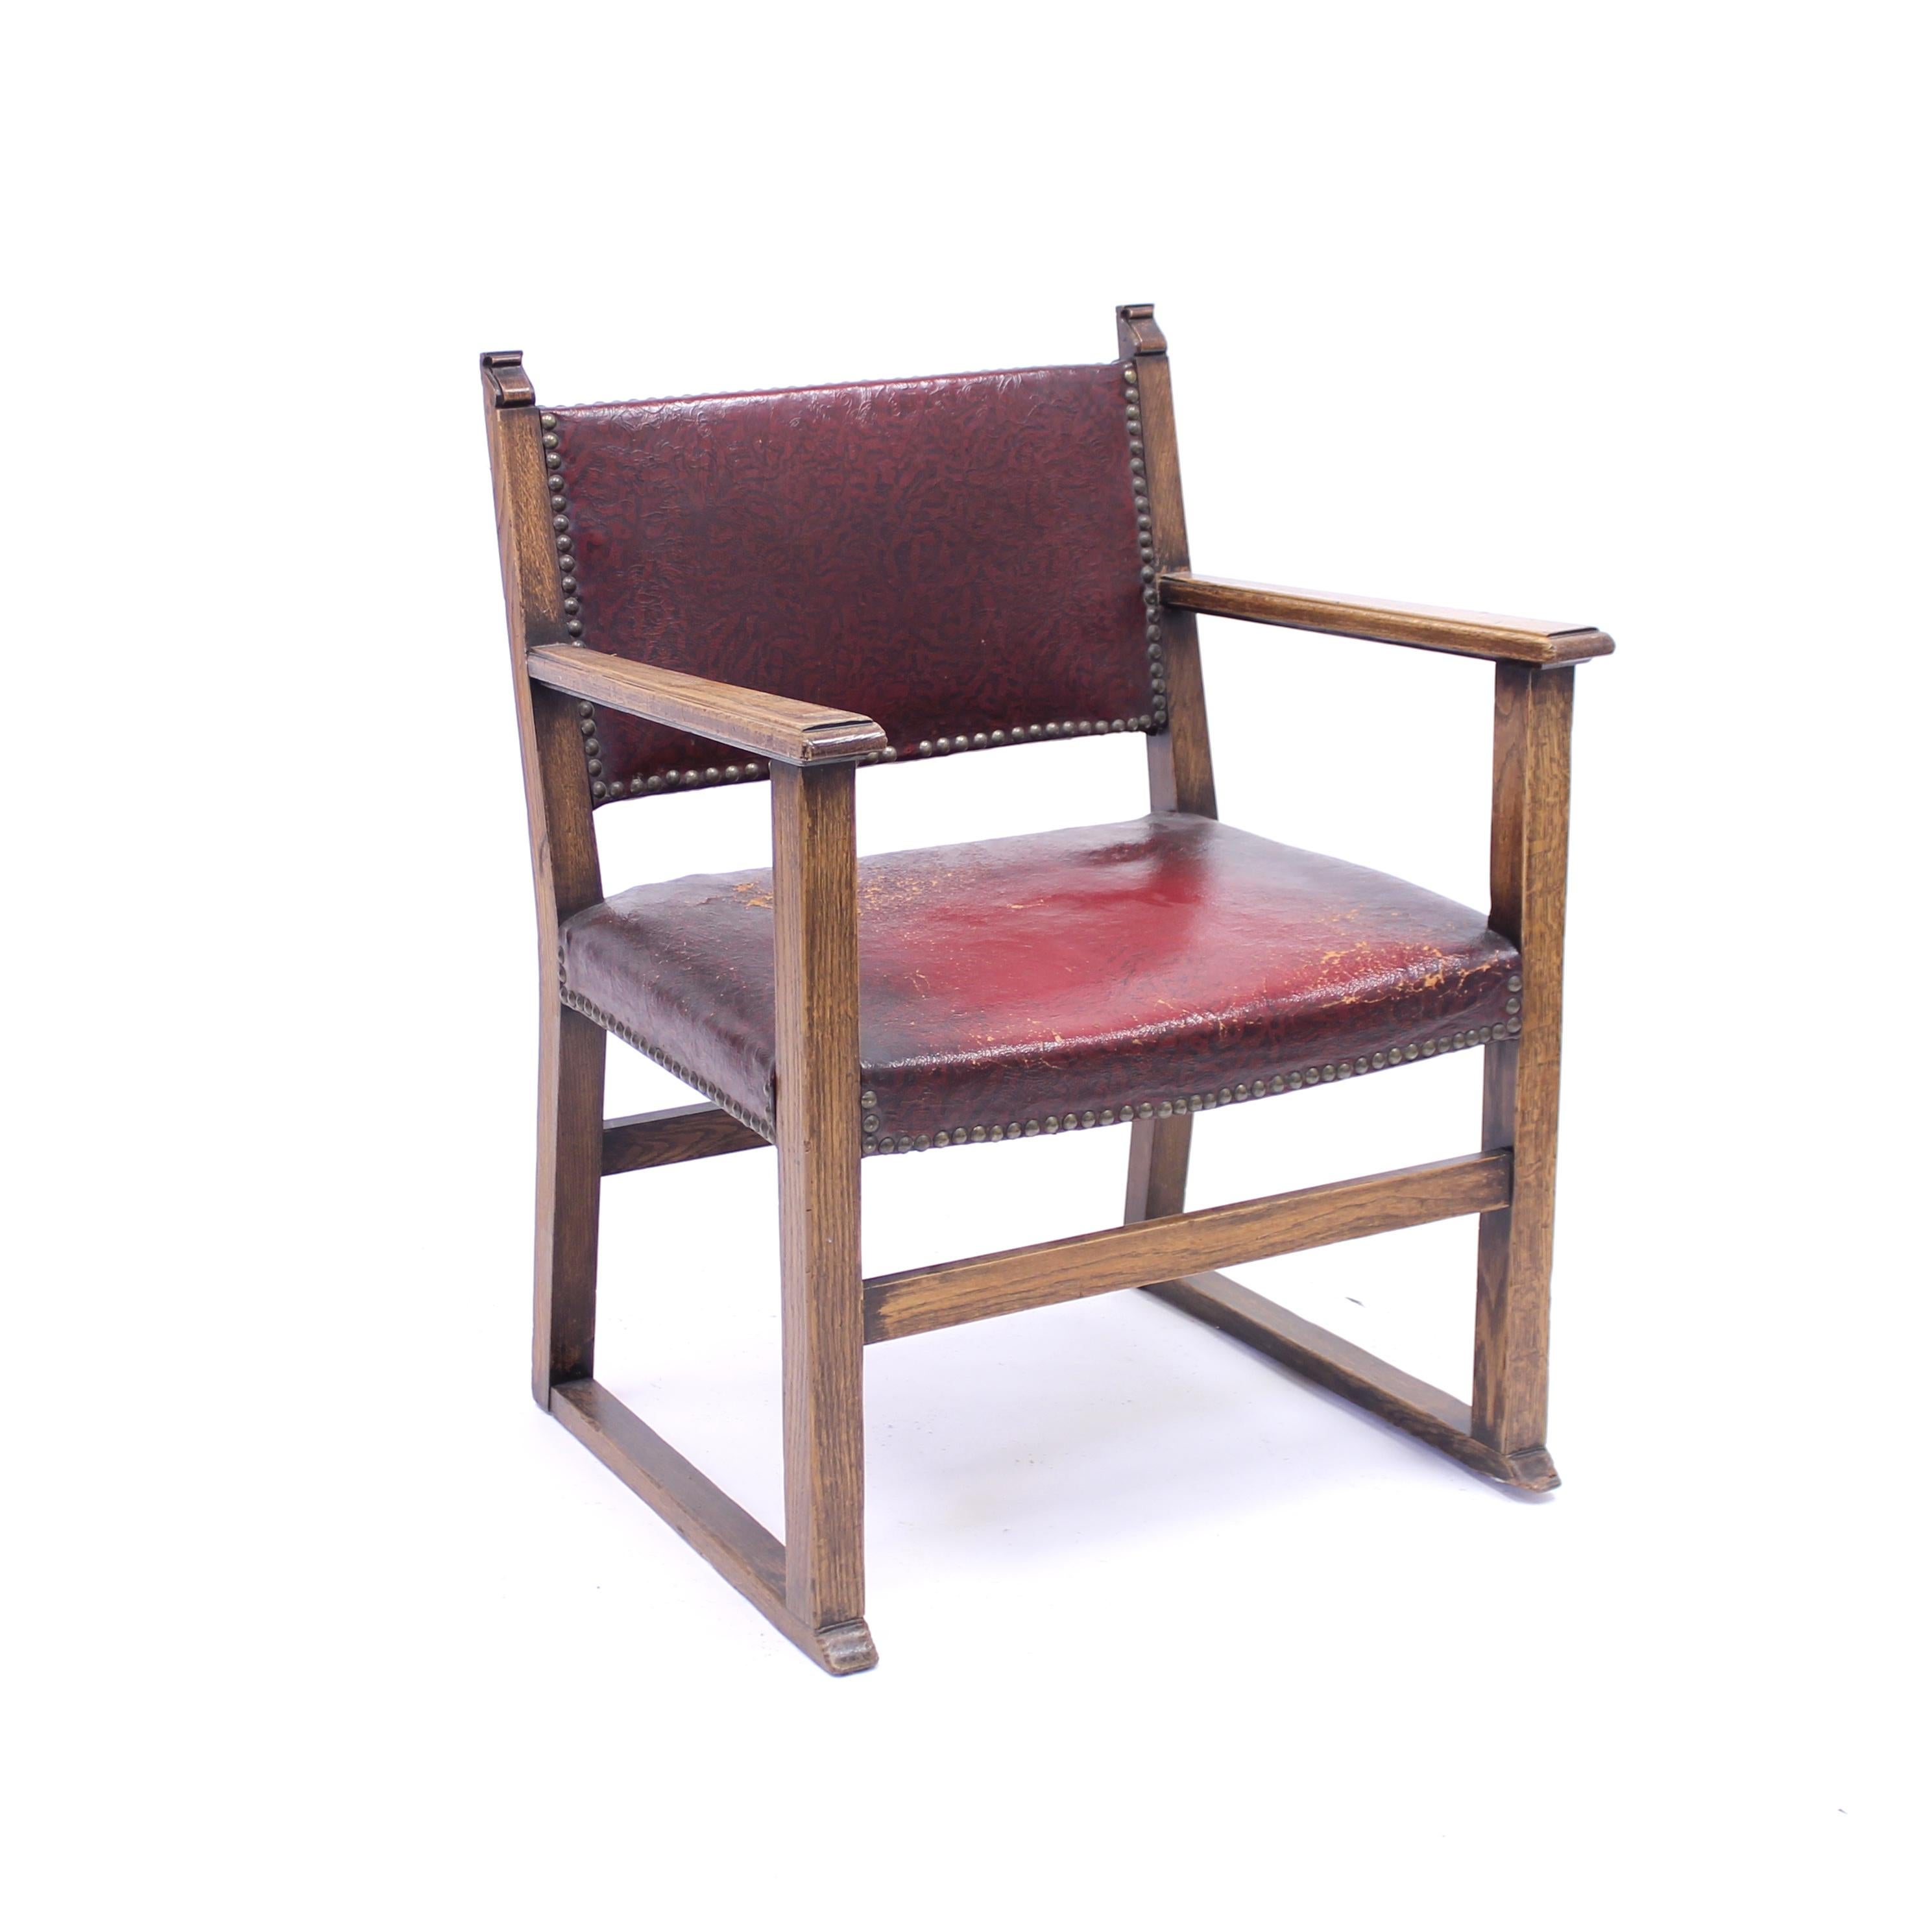 Fireside chair with a dark oak frame and red Naugahyde fabric from the 1930s, attributed to Austrian designer Adolf Loos. Adolf Loos used variants of this model in different interiors in both Czechia and Austria and the similar model he used is